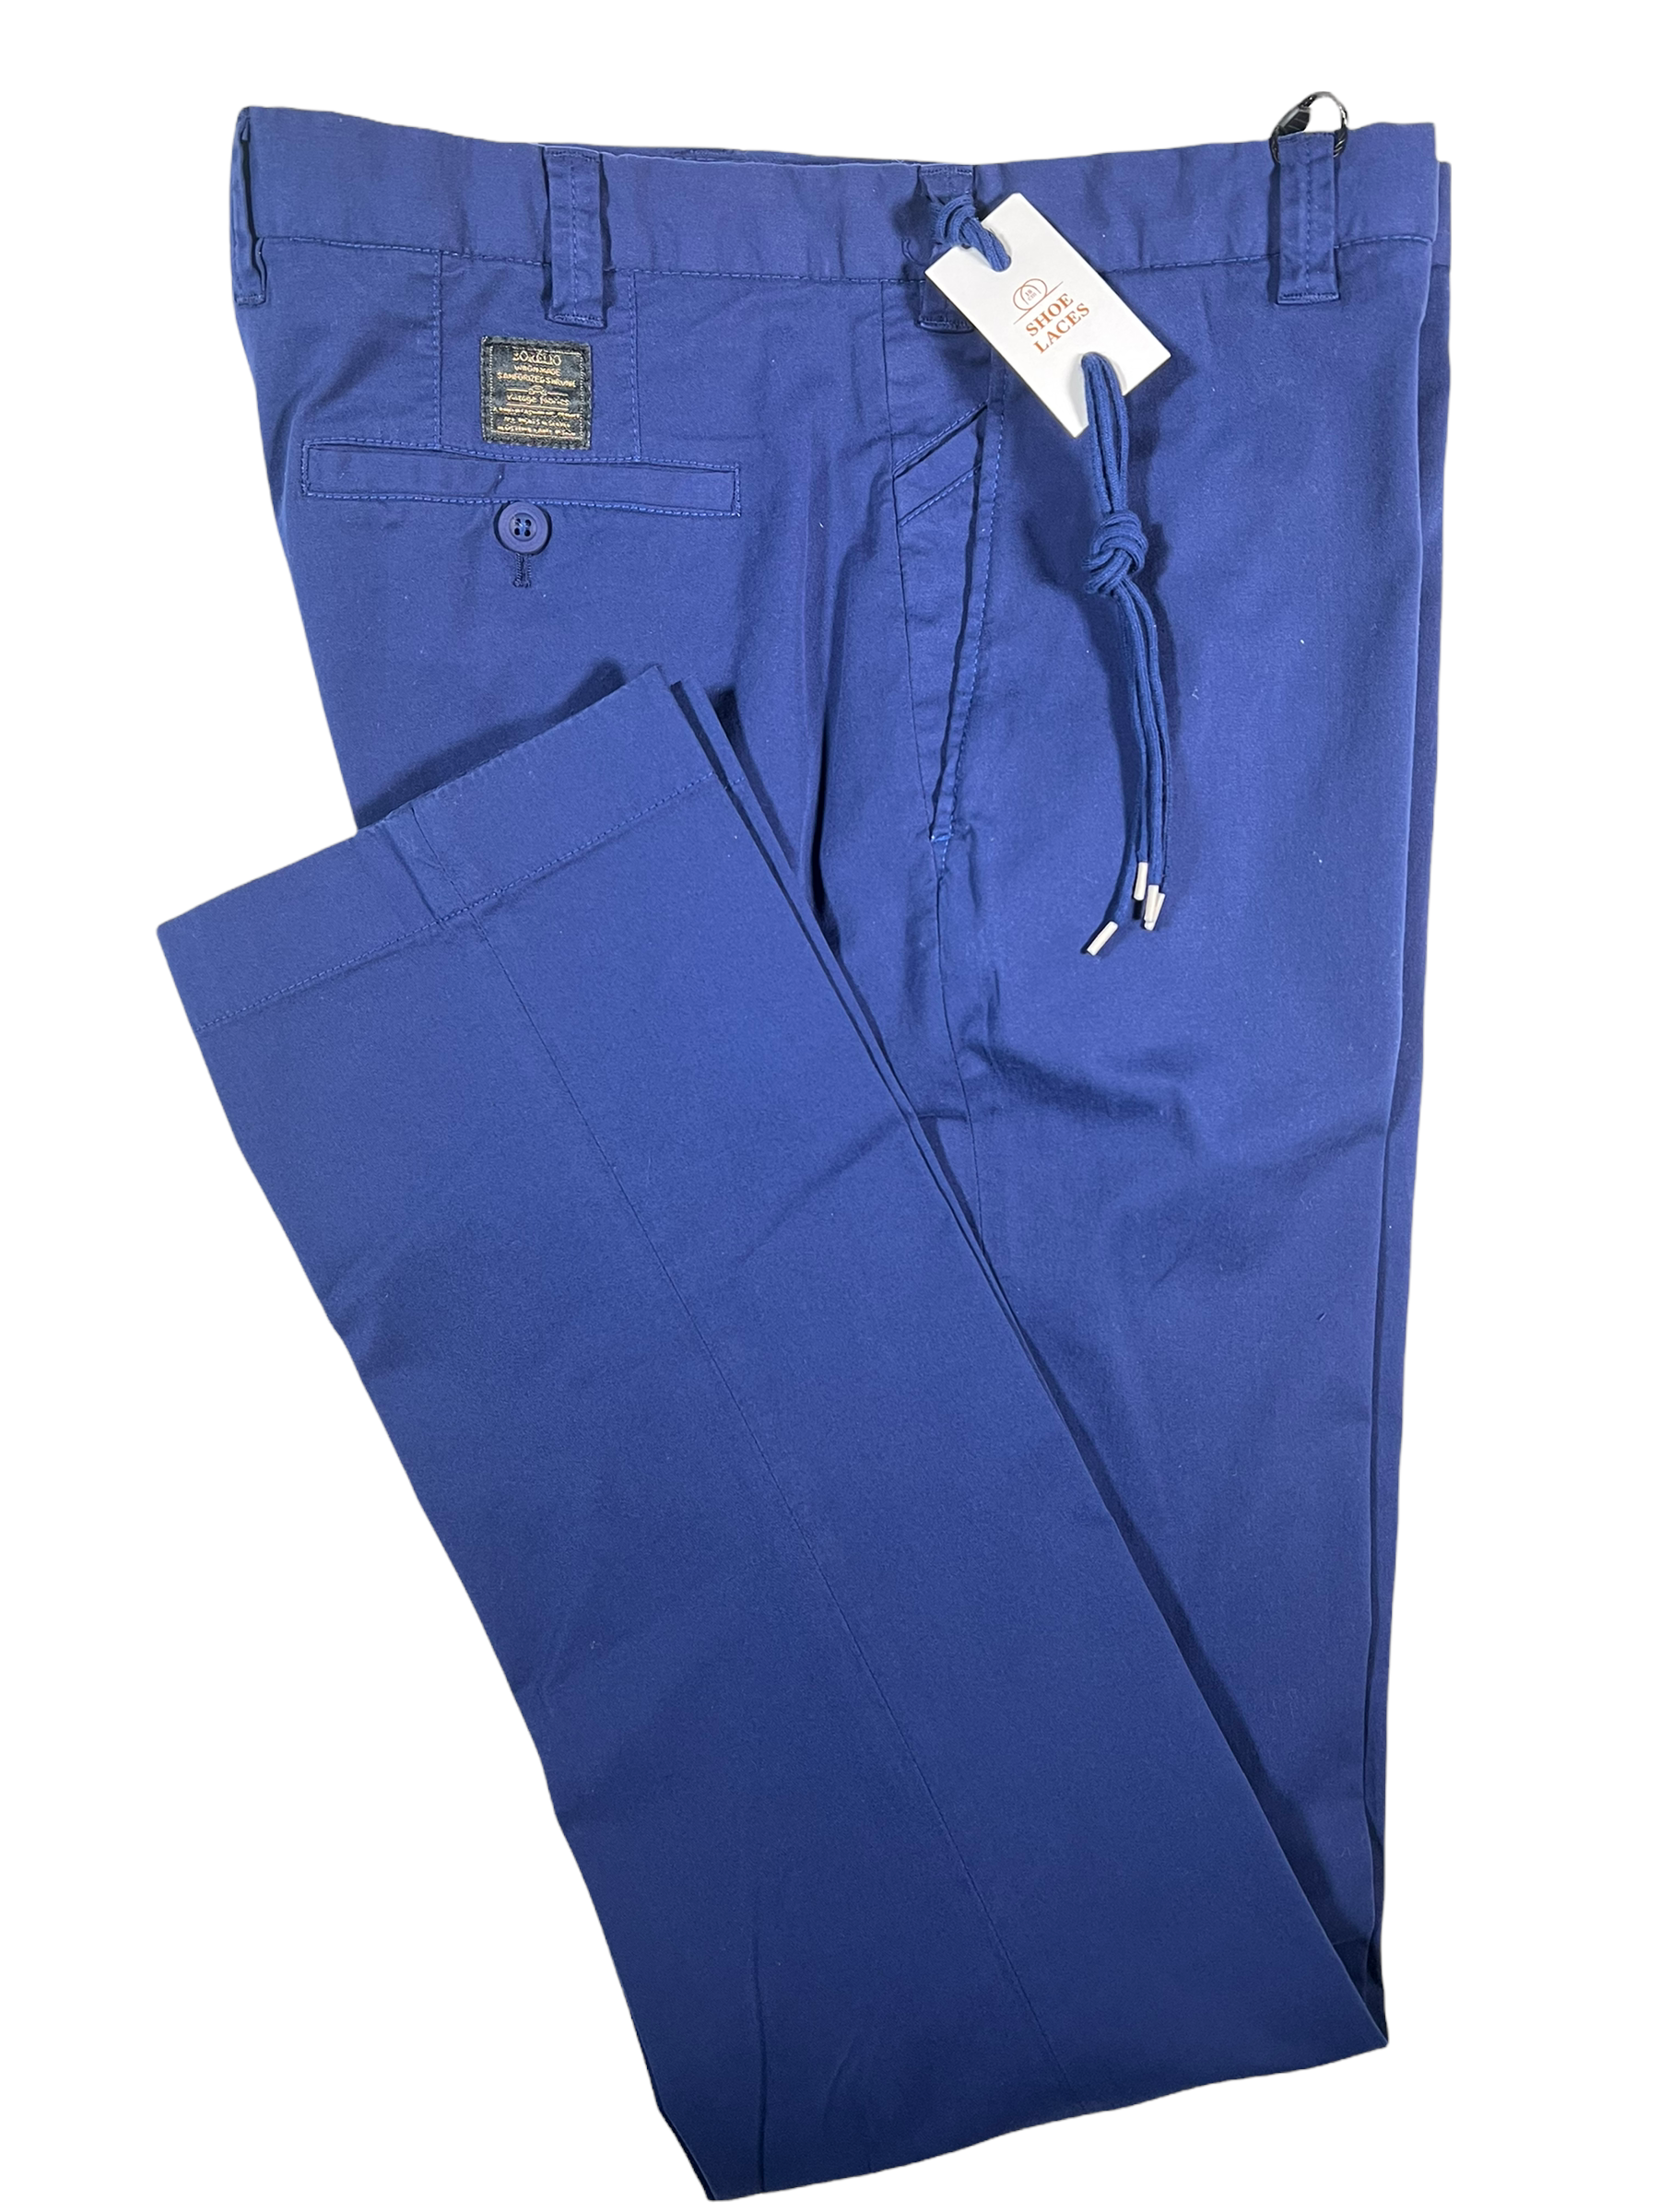 Pants | Womens Boboutic Soft Cotton Pants Navy - William Duell